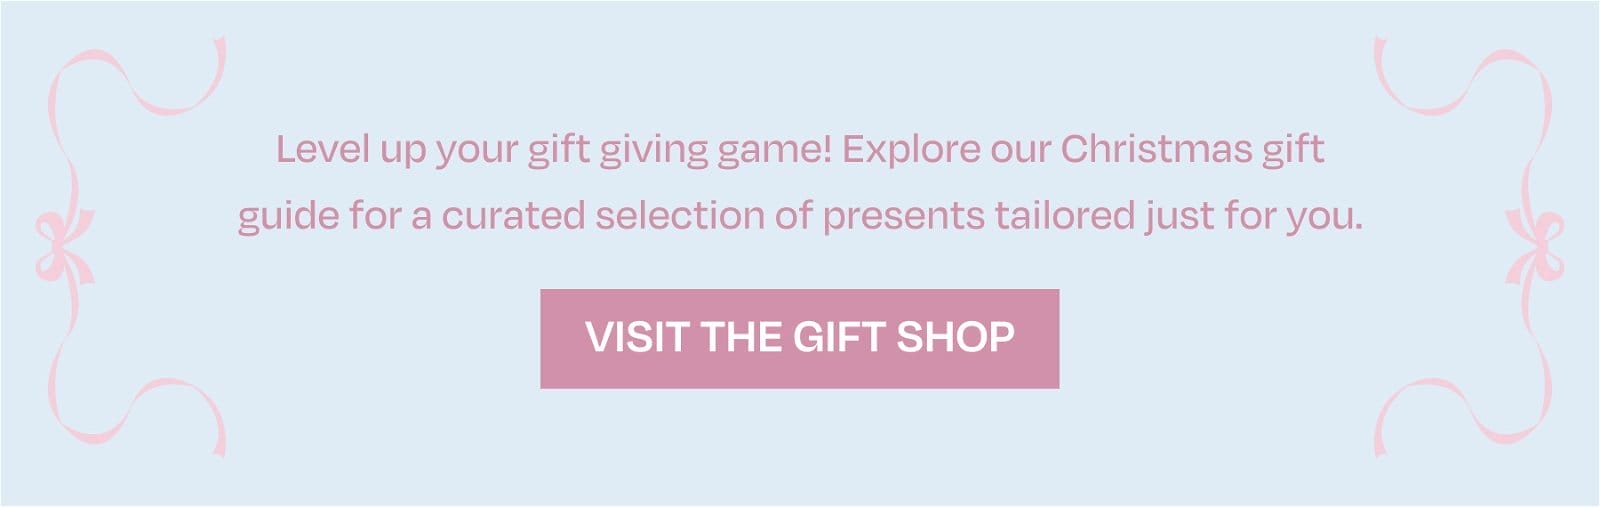 Level up your gift giving game! Explore our Christmas gift guide for a curated selection of presents tailored just for you.